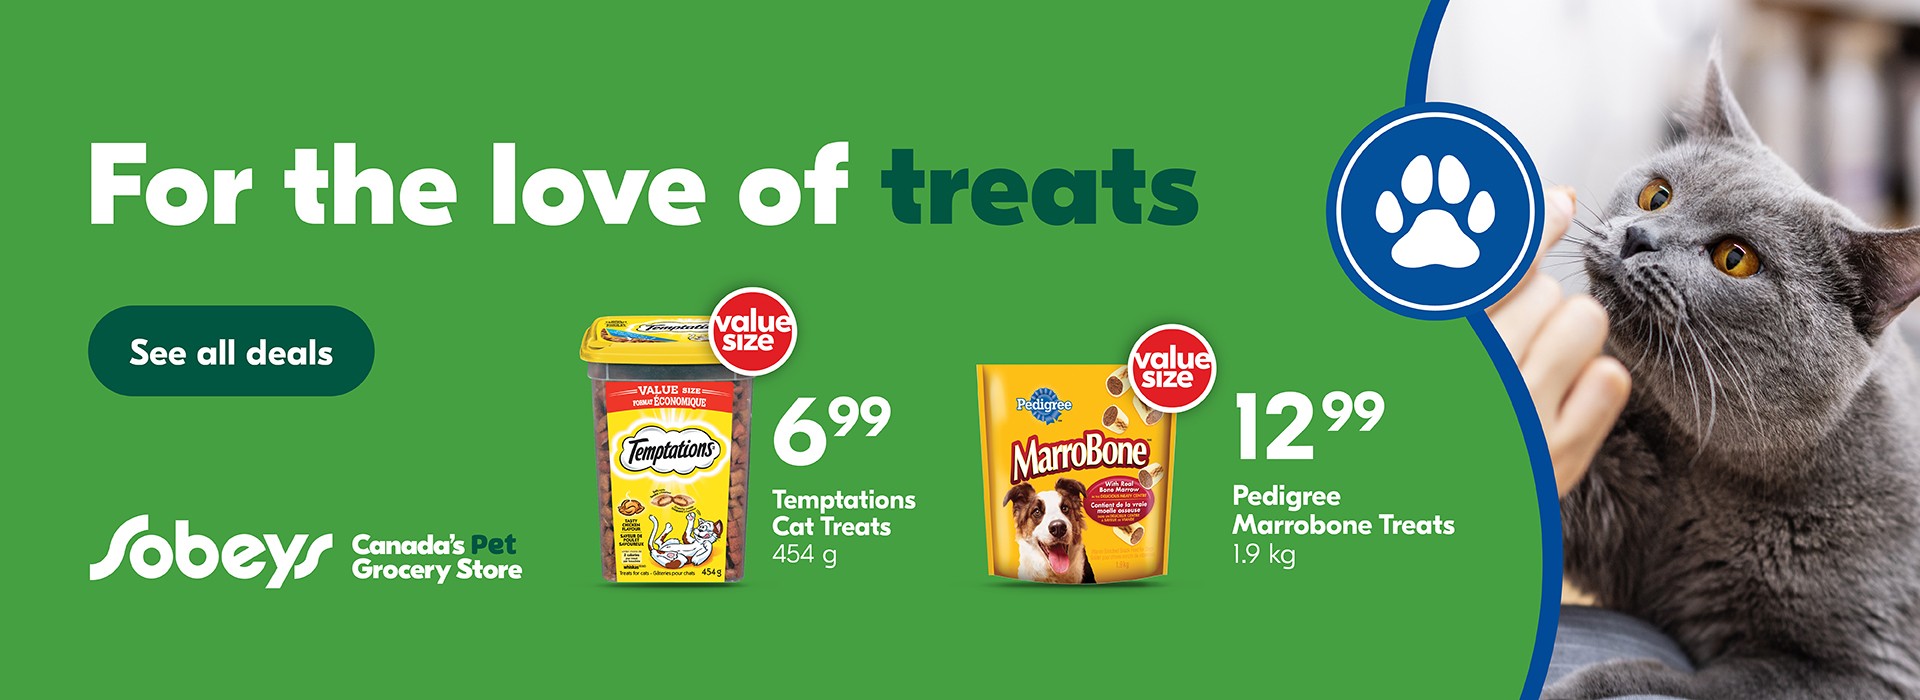 For the love of treats.